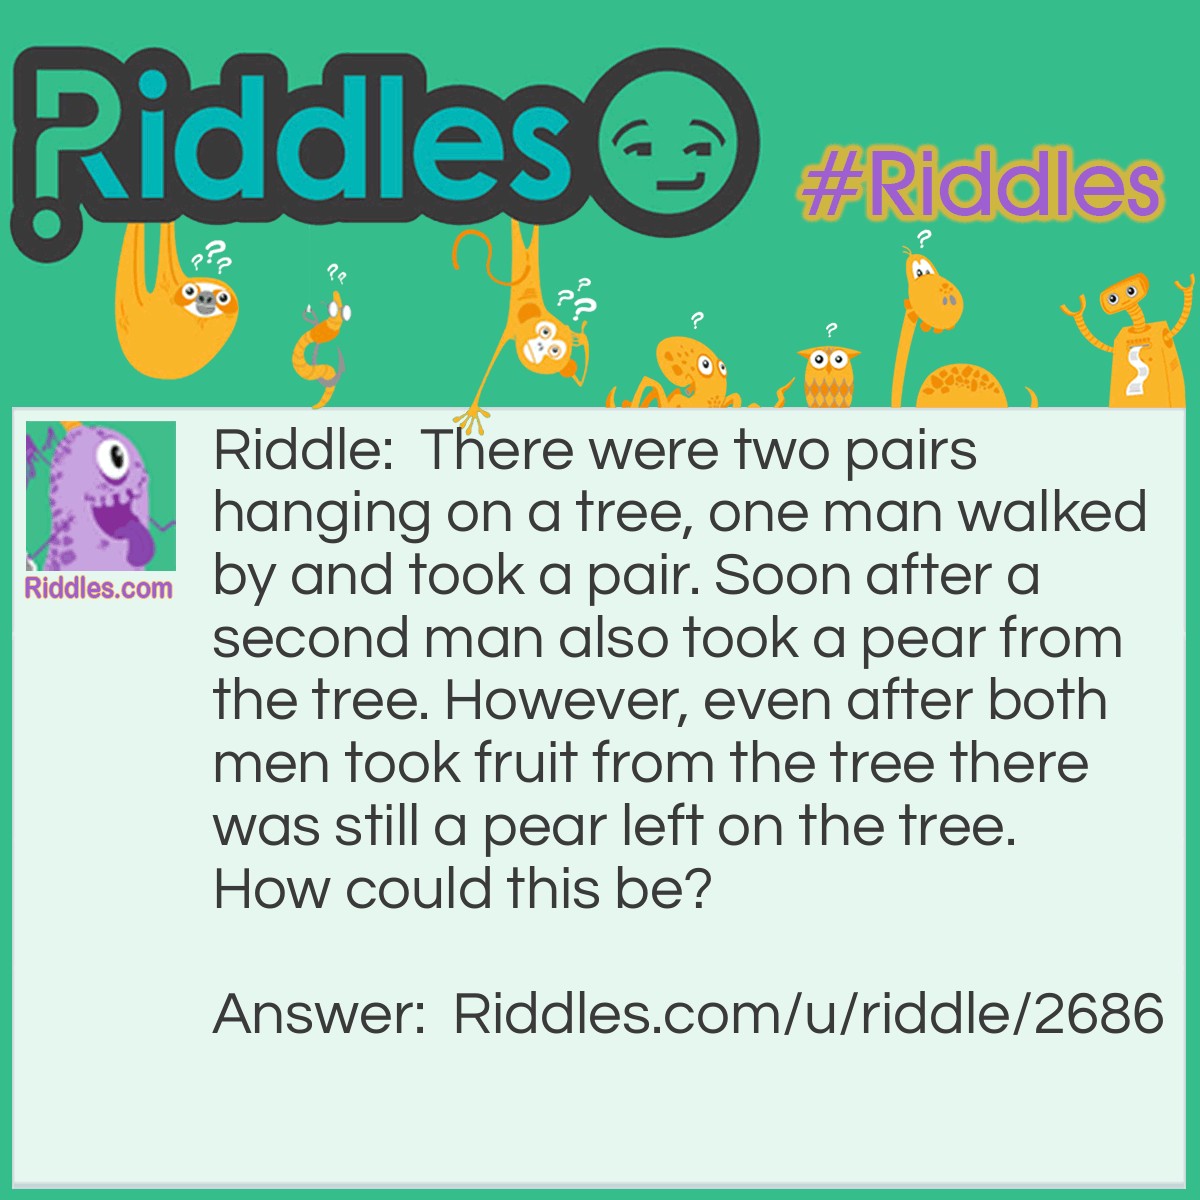 Riddle: There were two pairs hanging on a tree, one man walked by and took a pair. Soon after a second man also took a pear from the tree. However, even after both men took fruit from the tree there was still a pear left on the tree. How could this be? Answer: There were four pears (2 pairs) on the tree. The first man took a pair (2 pears) and the second only took one pear leaving one pear on the tree.